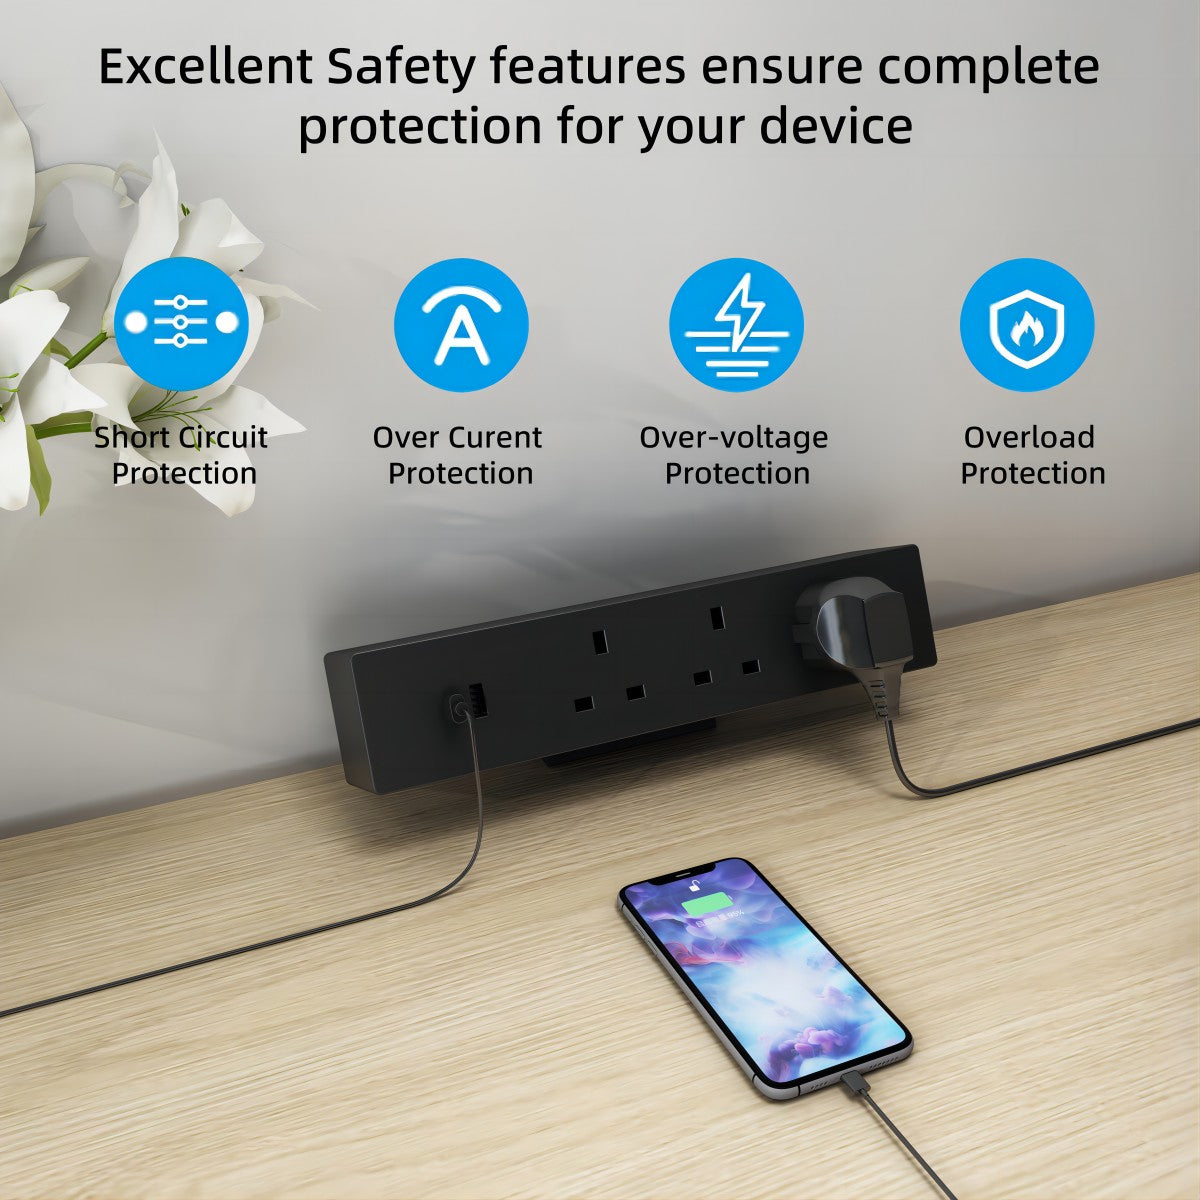 Maidesite power strip has excellent safety features to protect your device